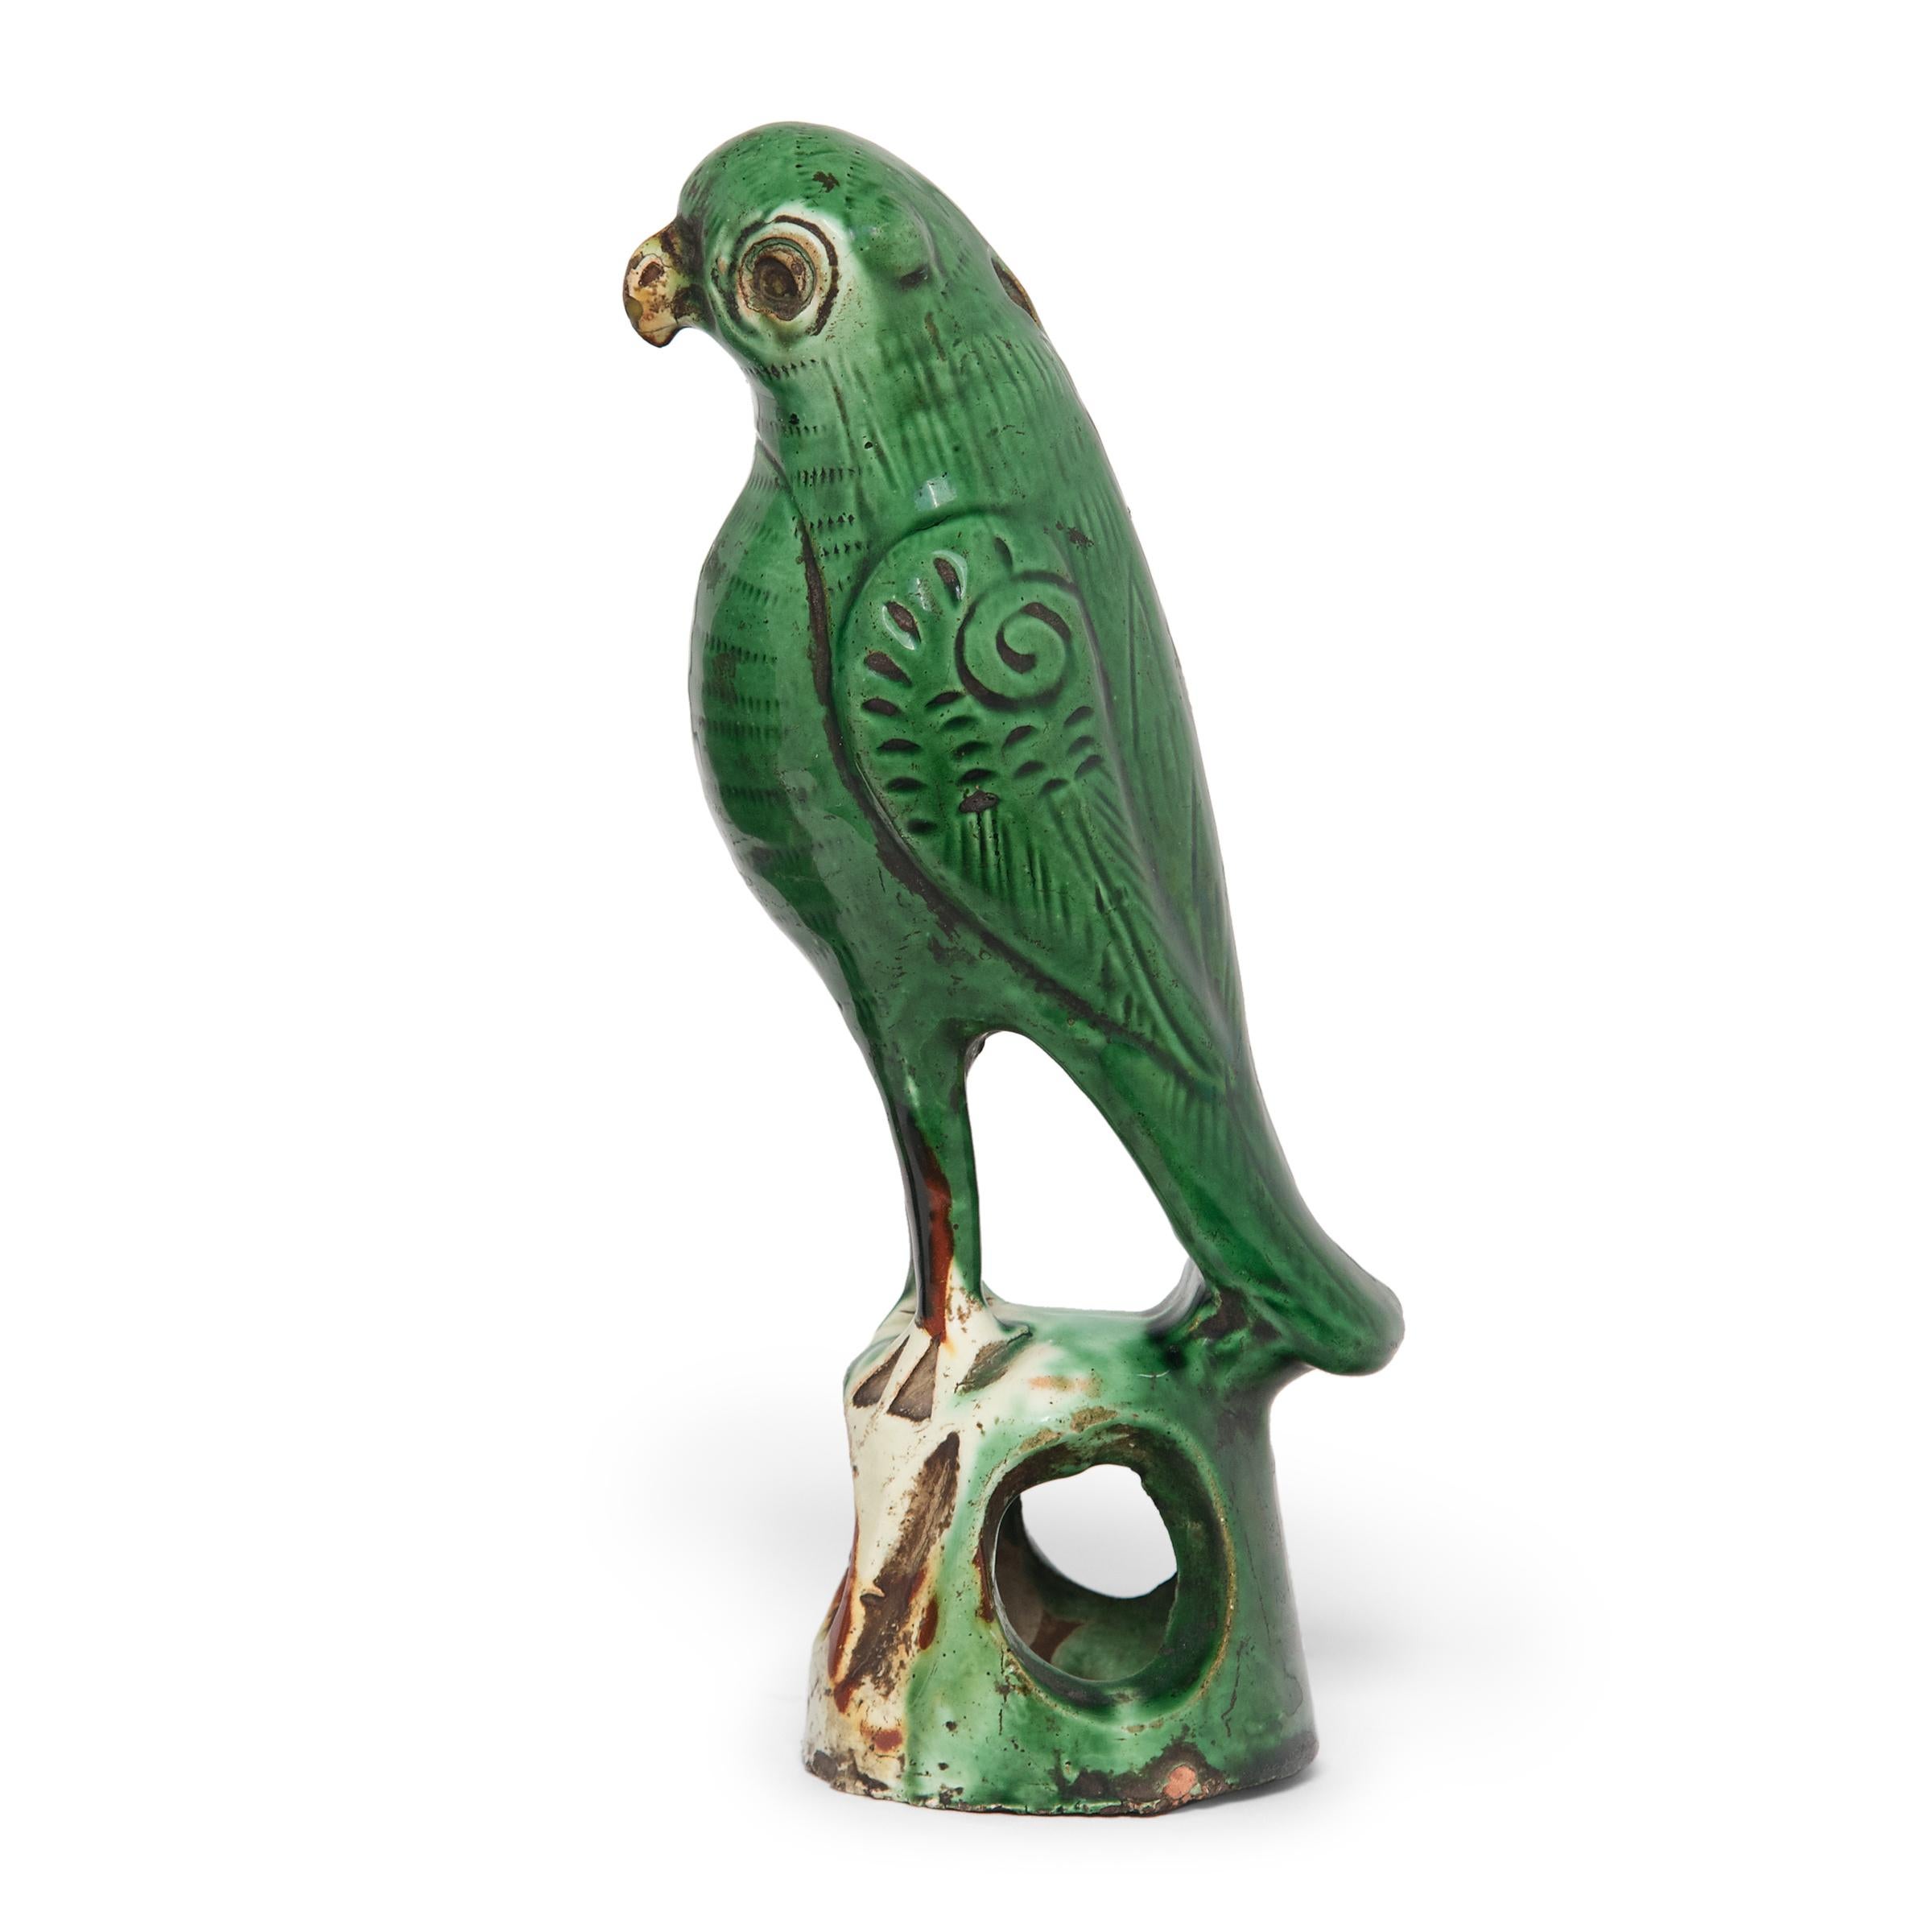 A symbol of freedom and long life, parrots have held a place of honor in Chinese culture for centuries. In fact, this parrot-shaped incense holder once played an important role in ancestor worship. Dated to the early 20th century, the ceramic parrot